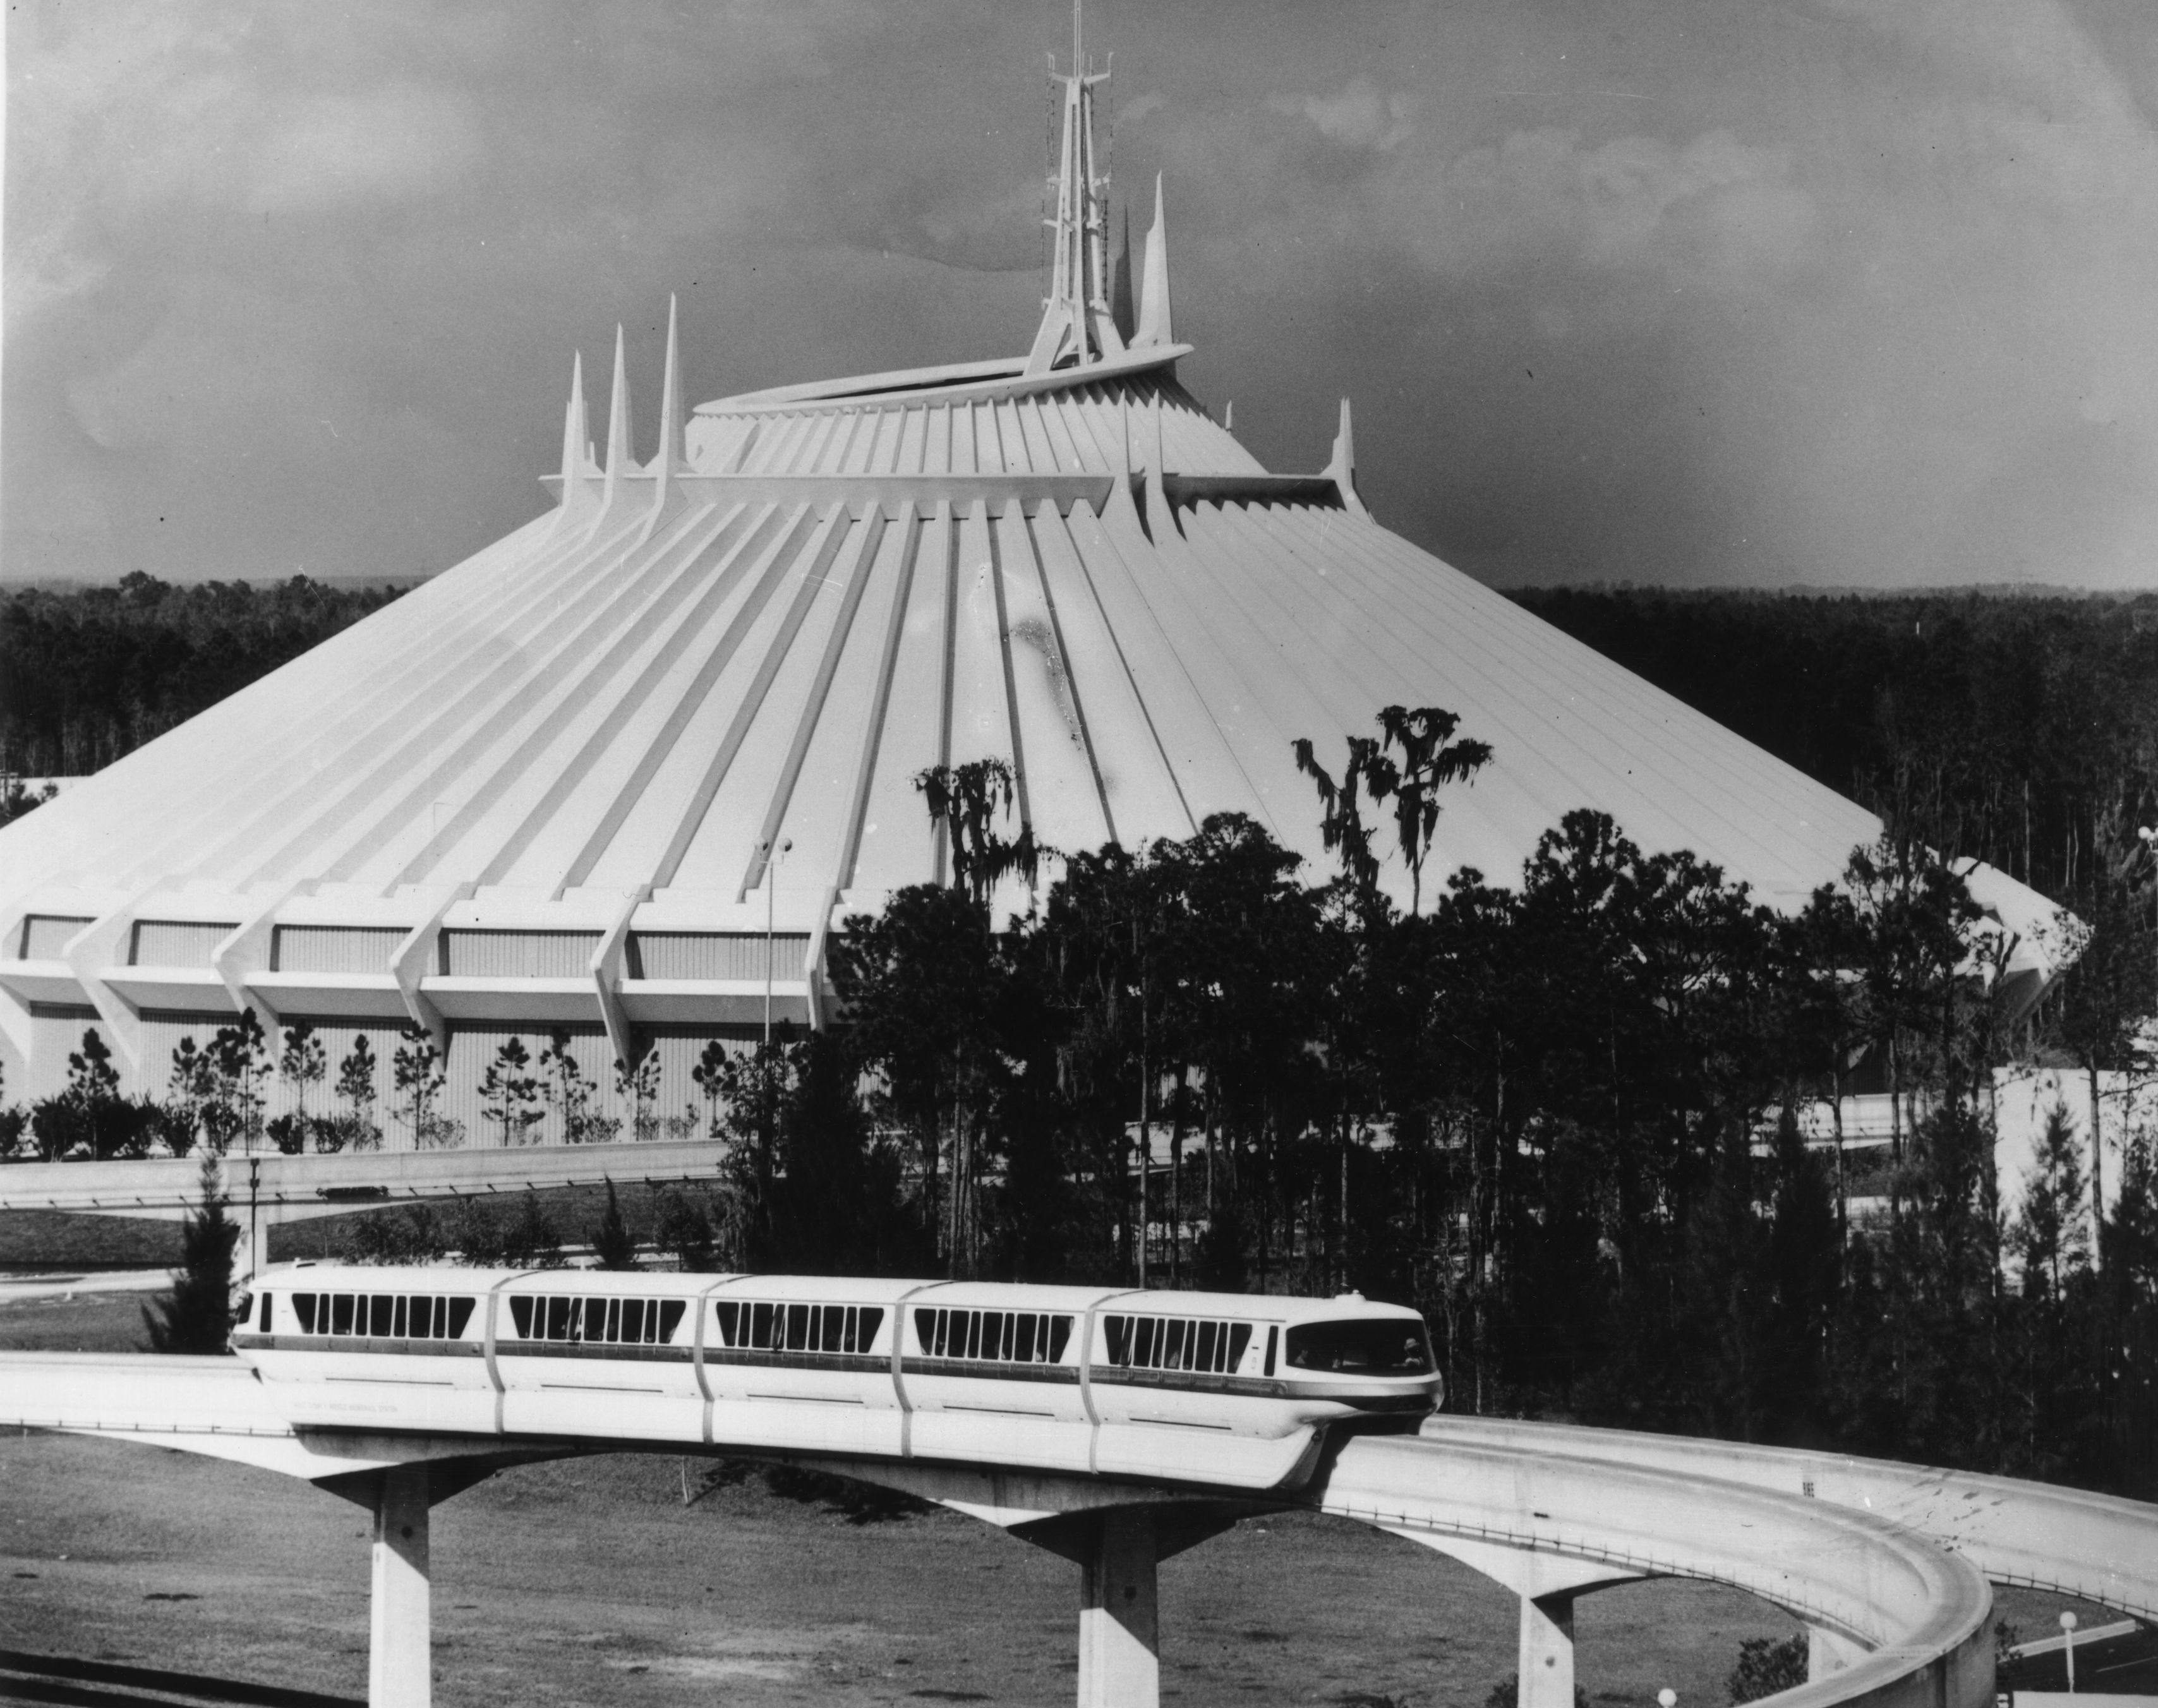 Space Mountain at Disney World in Florida im 1979.  (Photo by Central Press/Getty Images)